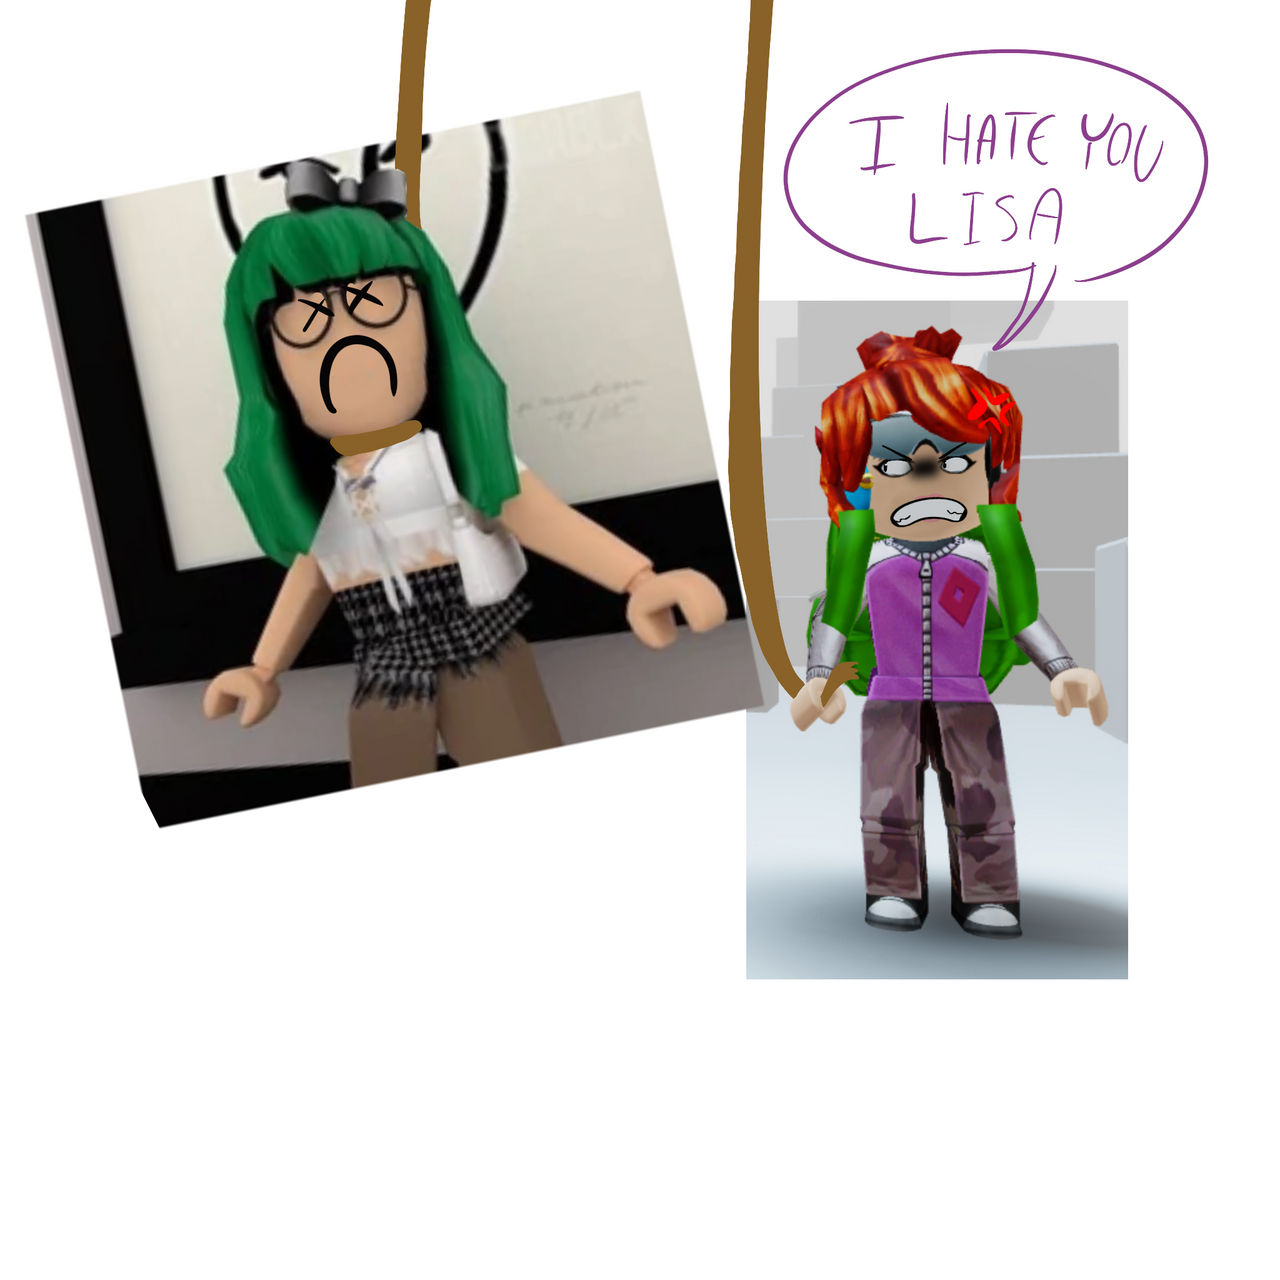 Hãy xem hình ảnh của Lisa để khám phá thêm những điều thú vị tại Roblox!

Translation:
Lisa has become one of the most famous streamers on Roblox and she has created many exciting games for the community. With her efforts and creativity, Roblox has officially introduced Lisa to the list of most popular creators in